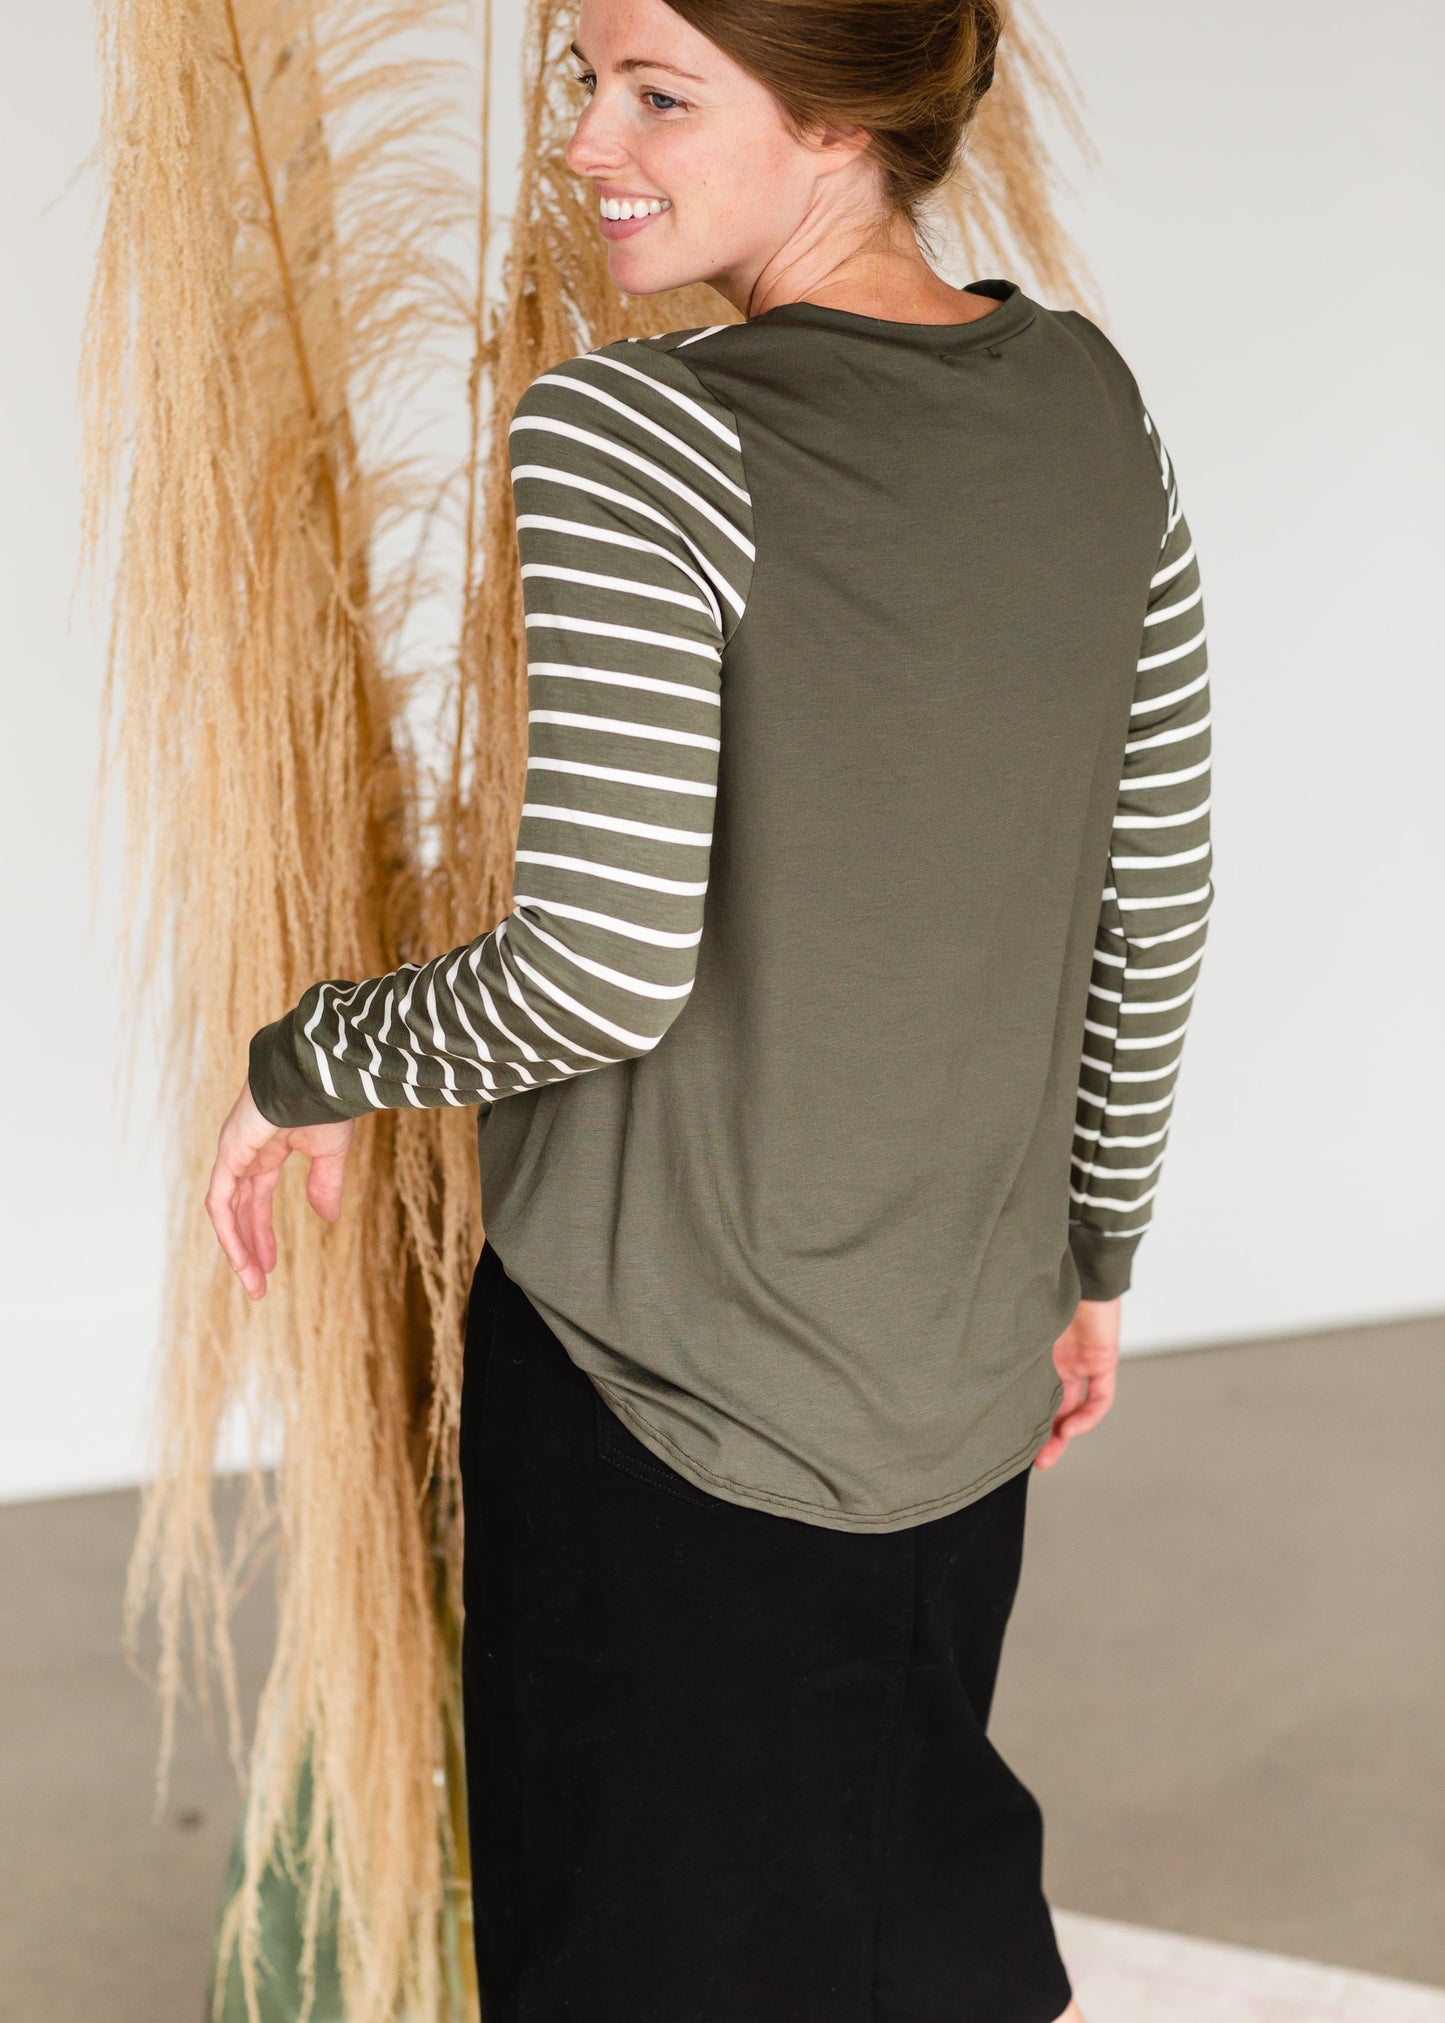 Olive High Lo Striped Long Sleeve Tee - FINAL SALE Tops